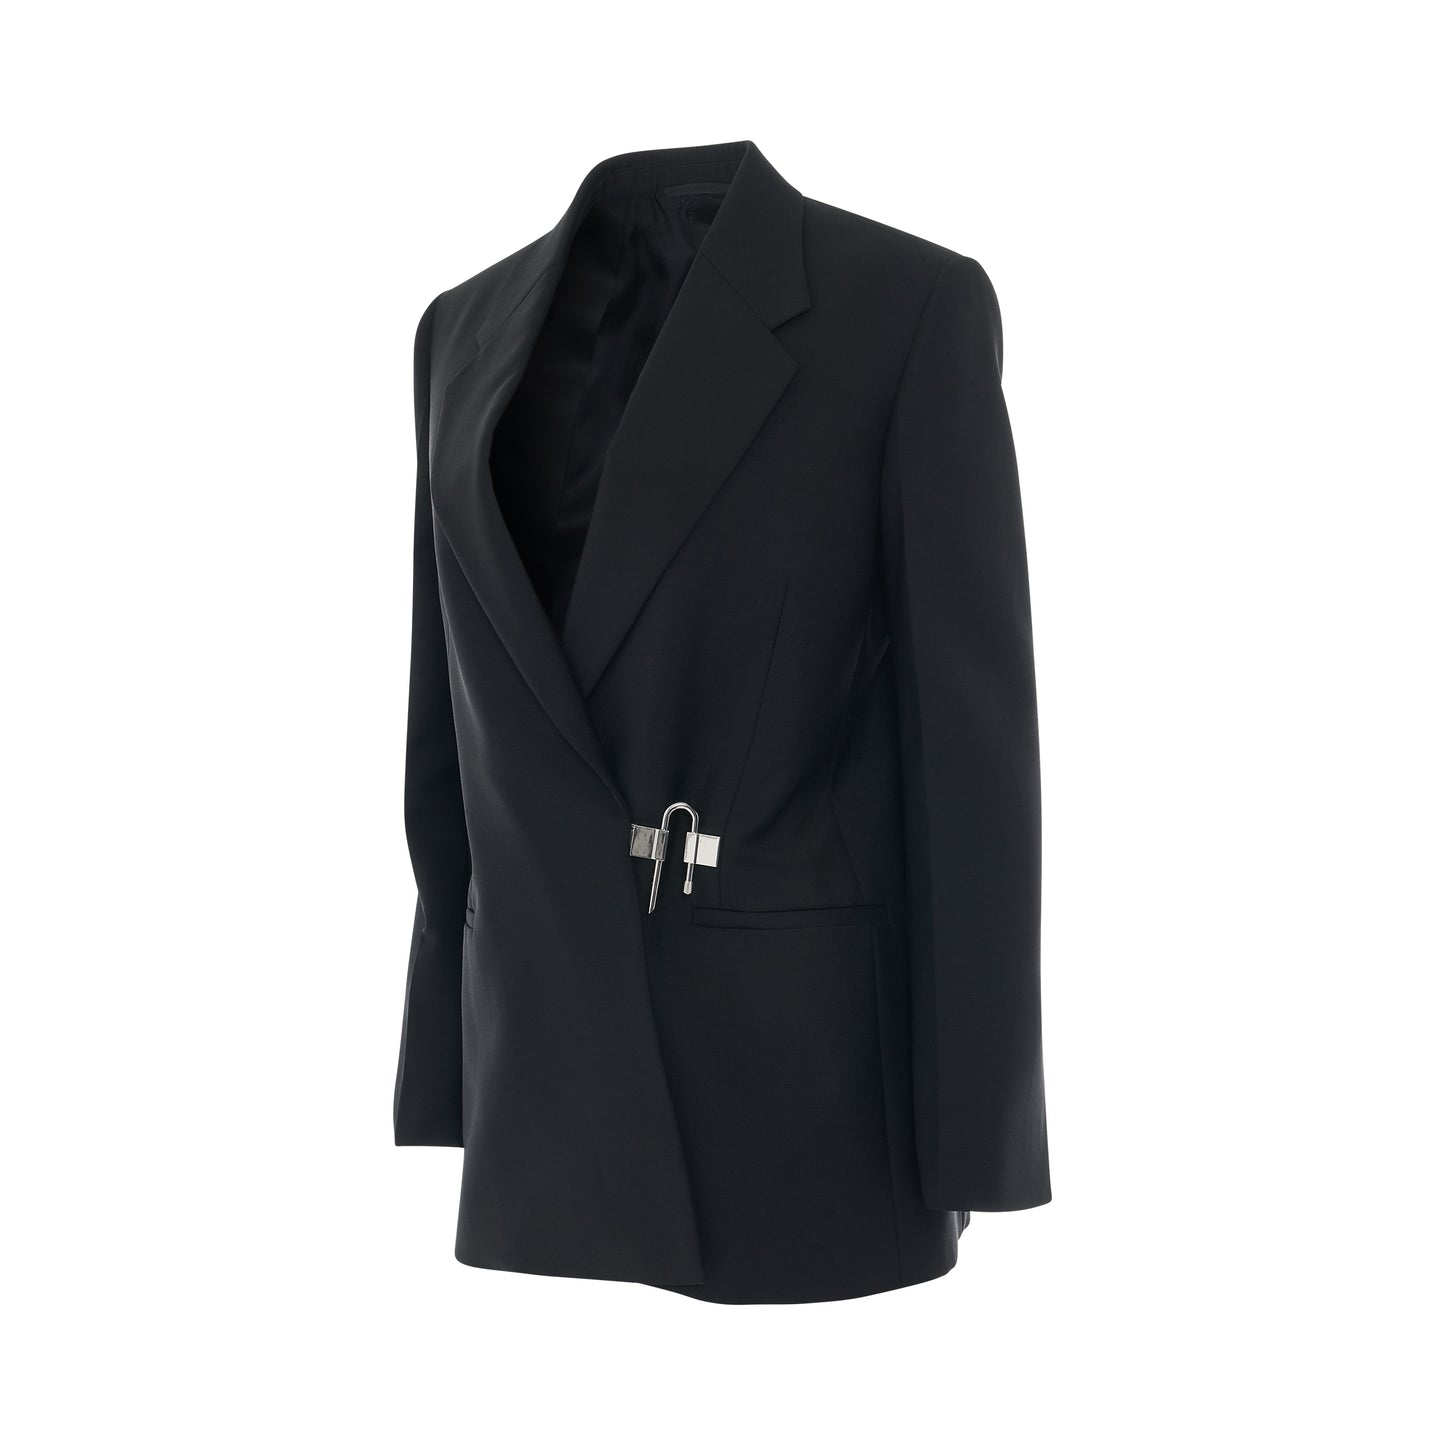 Givenchy U-lock Harness Wool-blend Suit Jacket